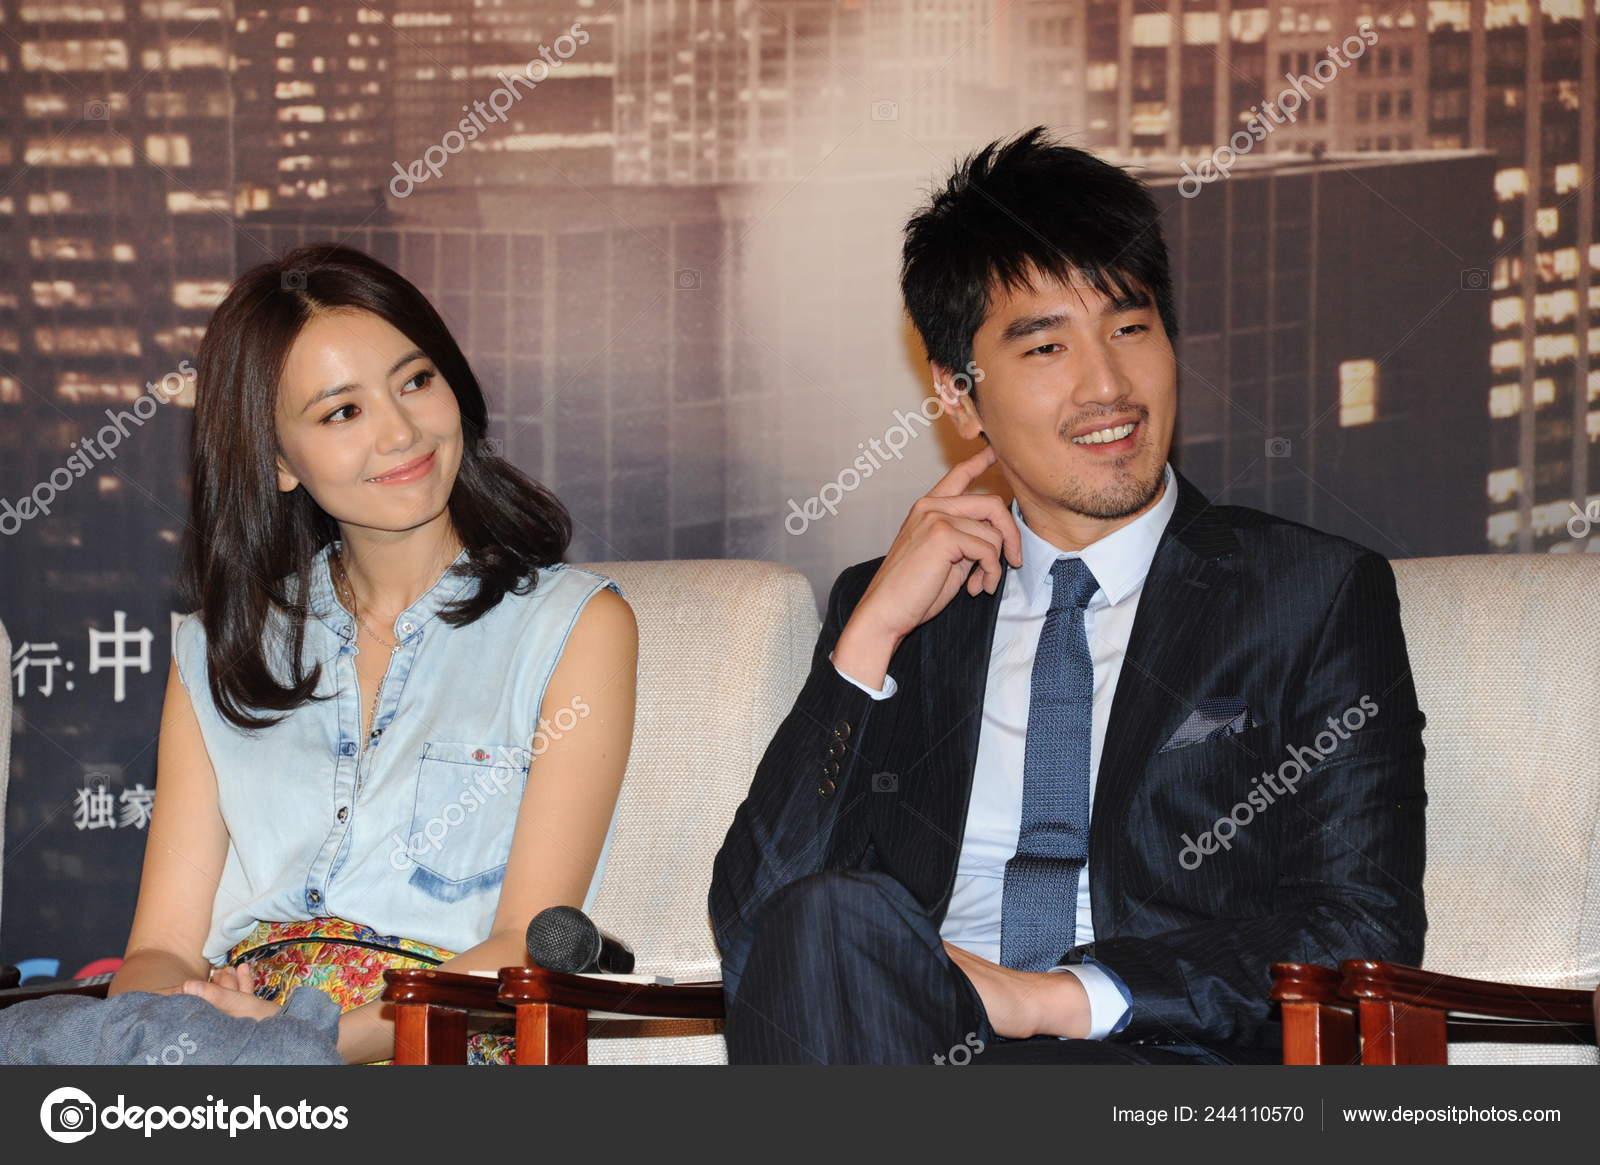 Download - Chinese actress Gao Yuanyuan and Taiwanese actor Mark Chao atten...